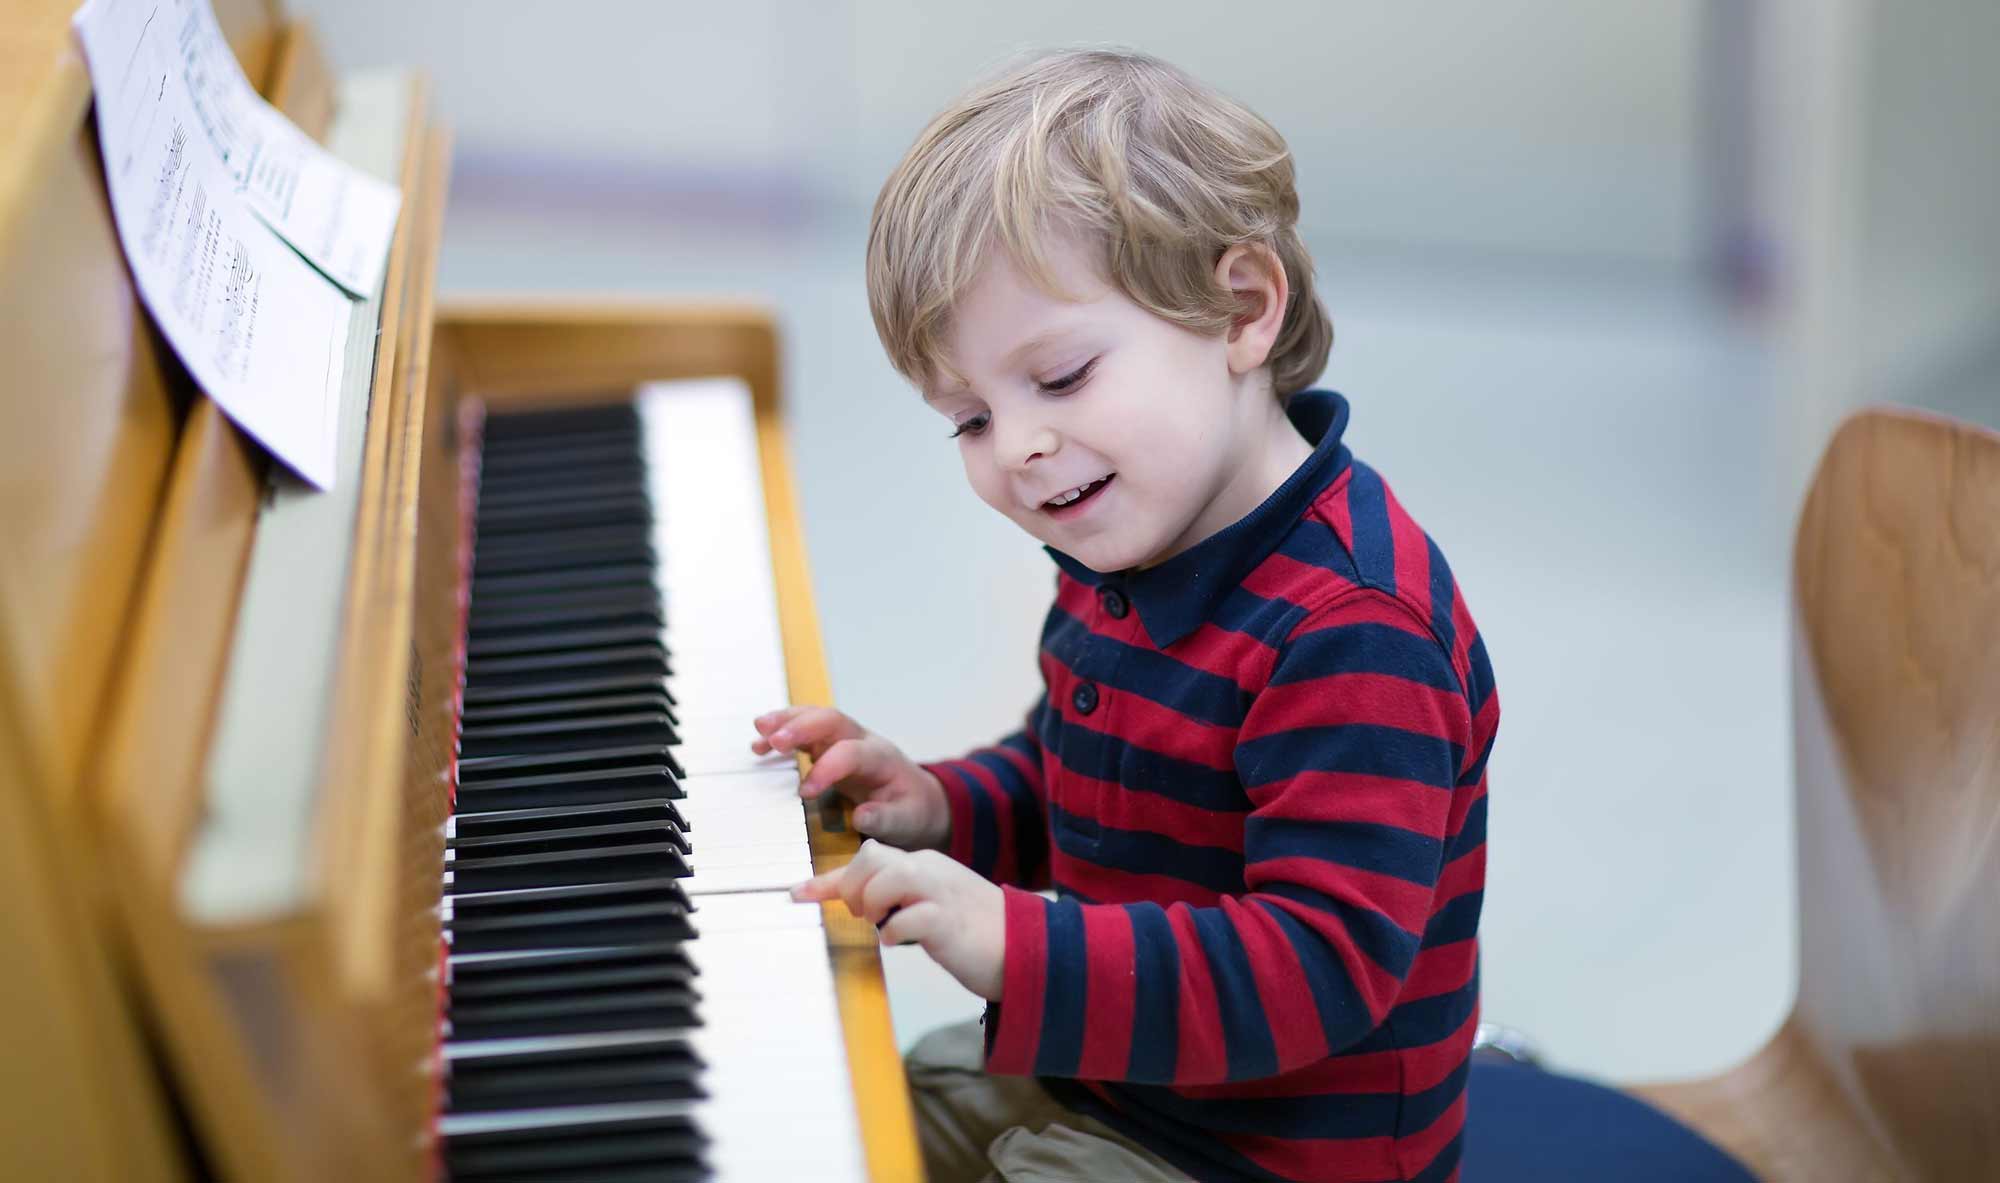 Are pianos fun for children to learn?